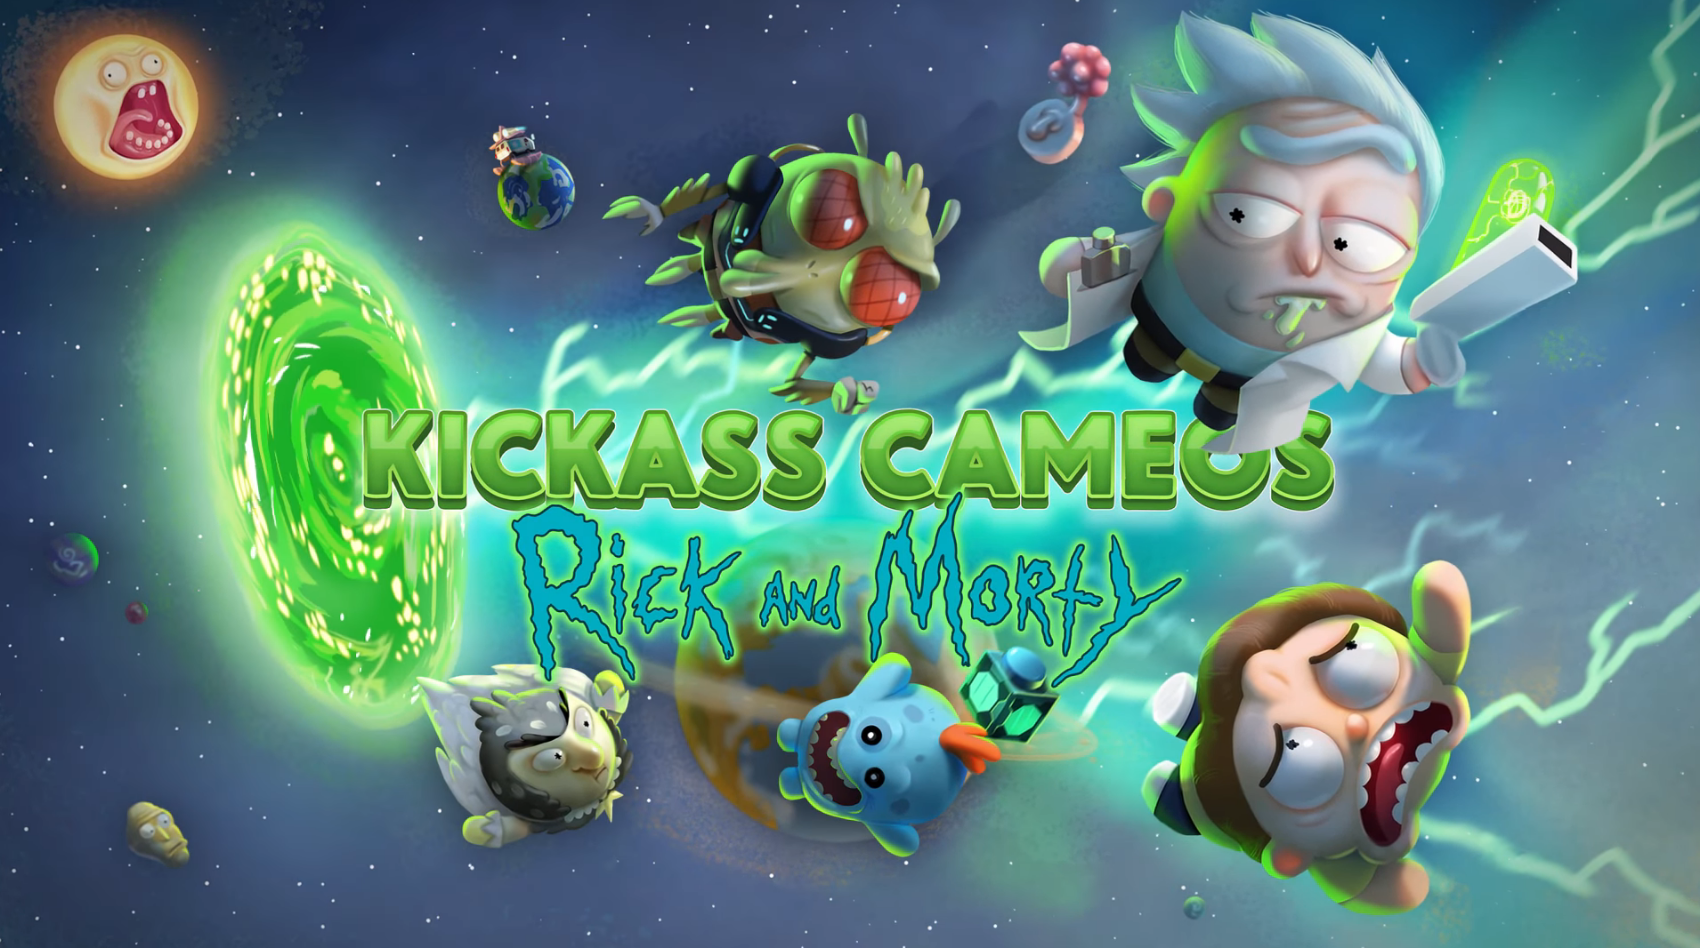 Rick And Morty Steam Rick And Morty Characters Added For Free To PC Party Game Move Or Die -  GameSpot